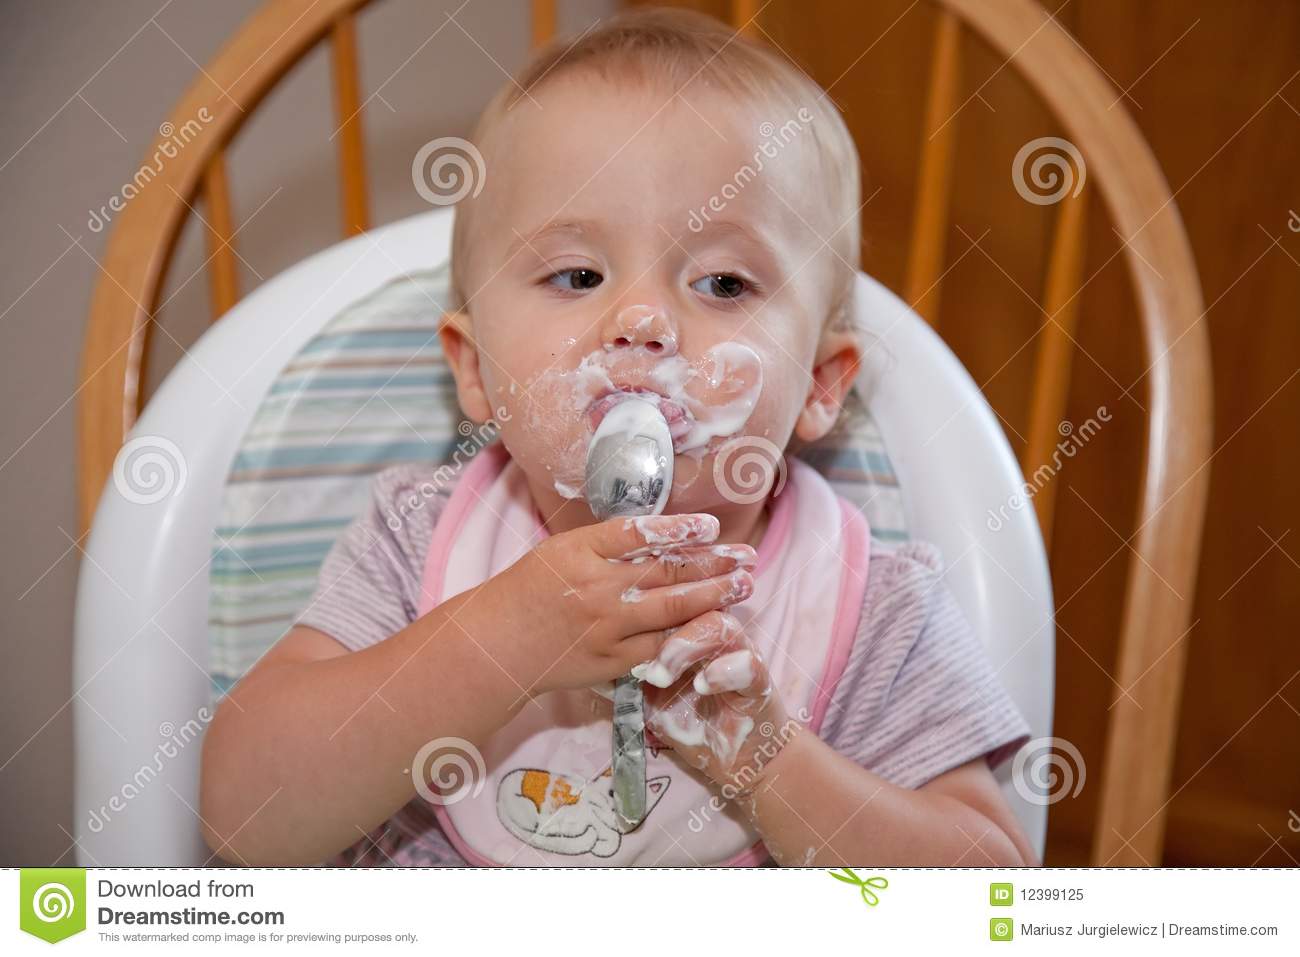 Messy Eater Royalty Free Stock Photo   Image  12399125